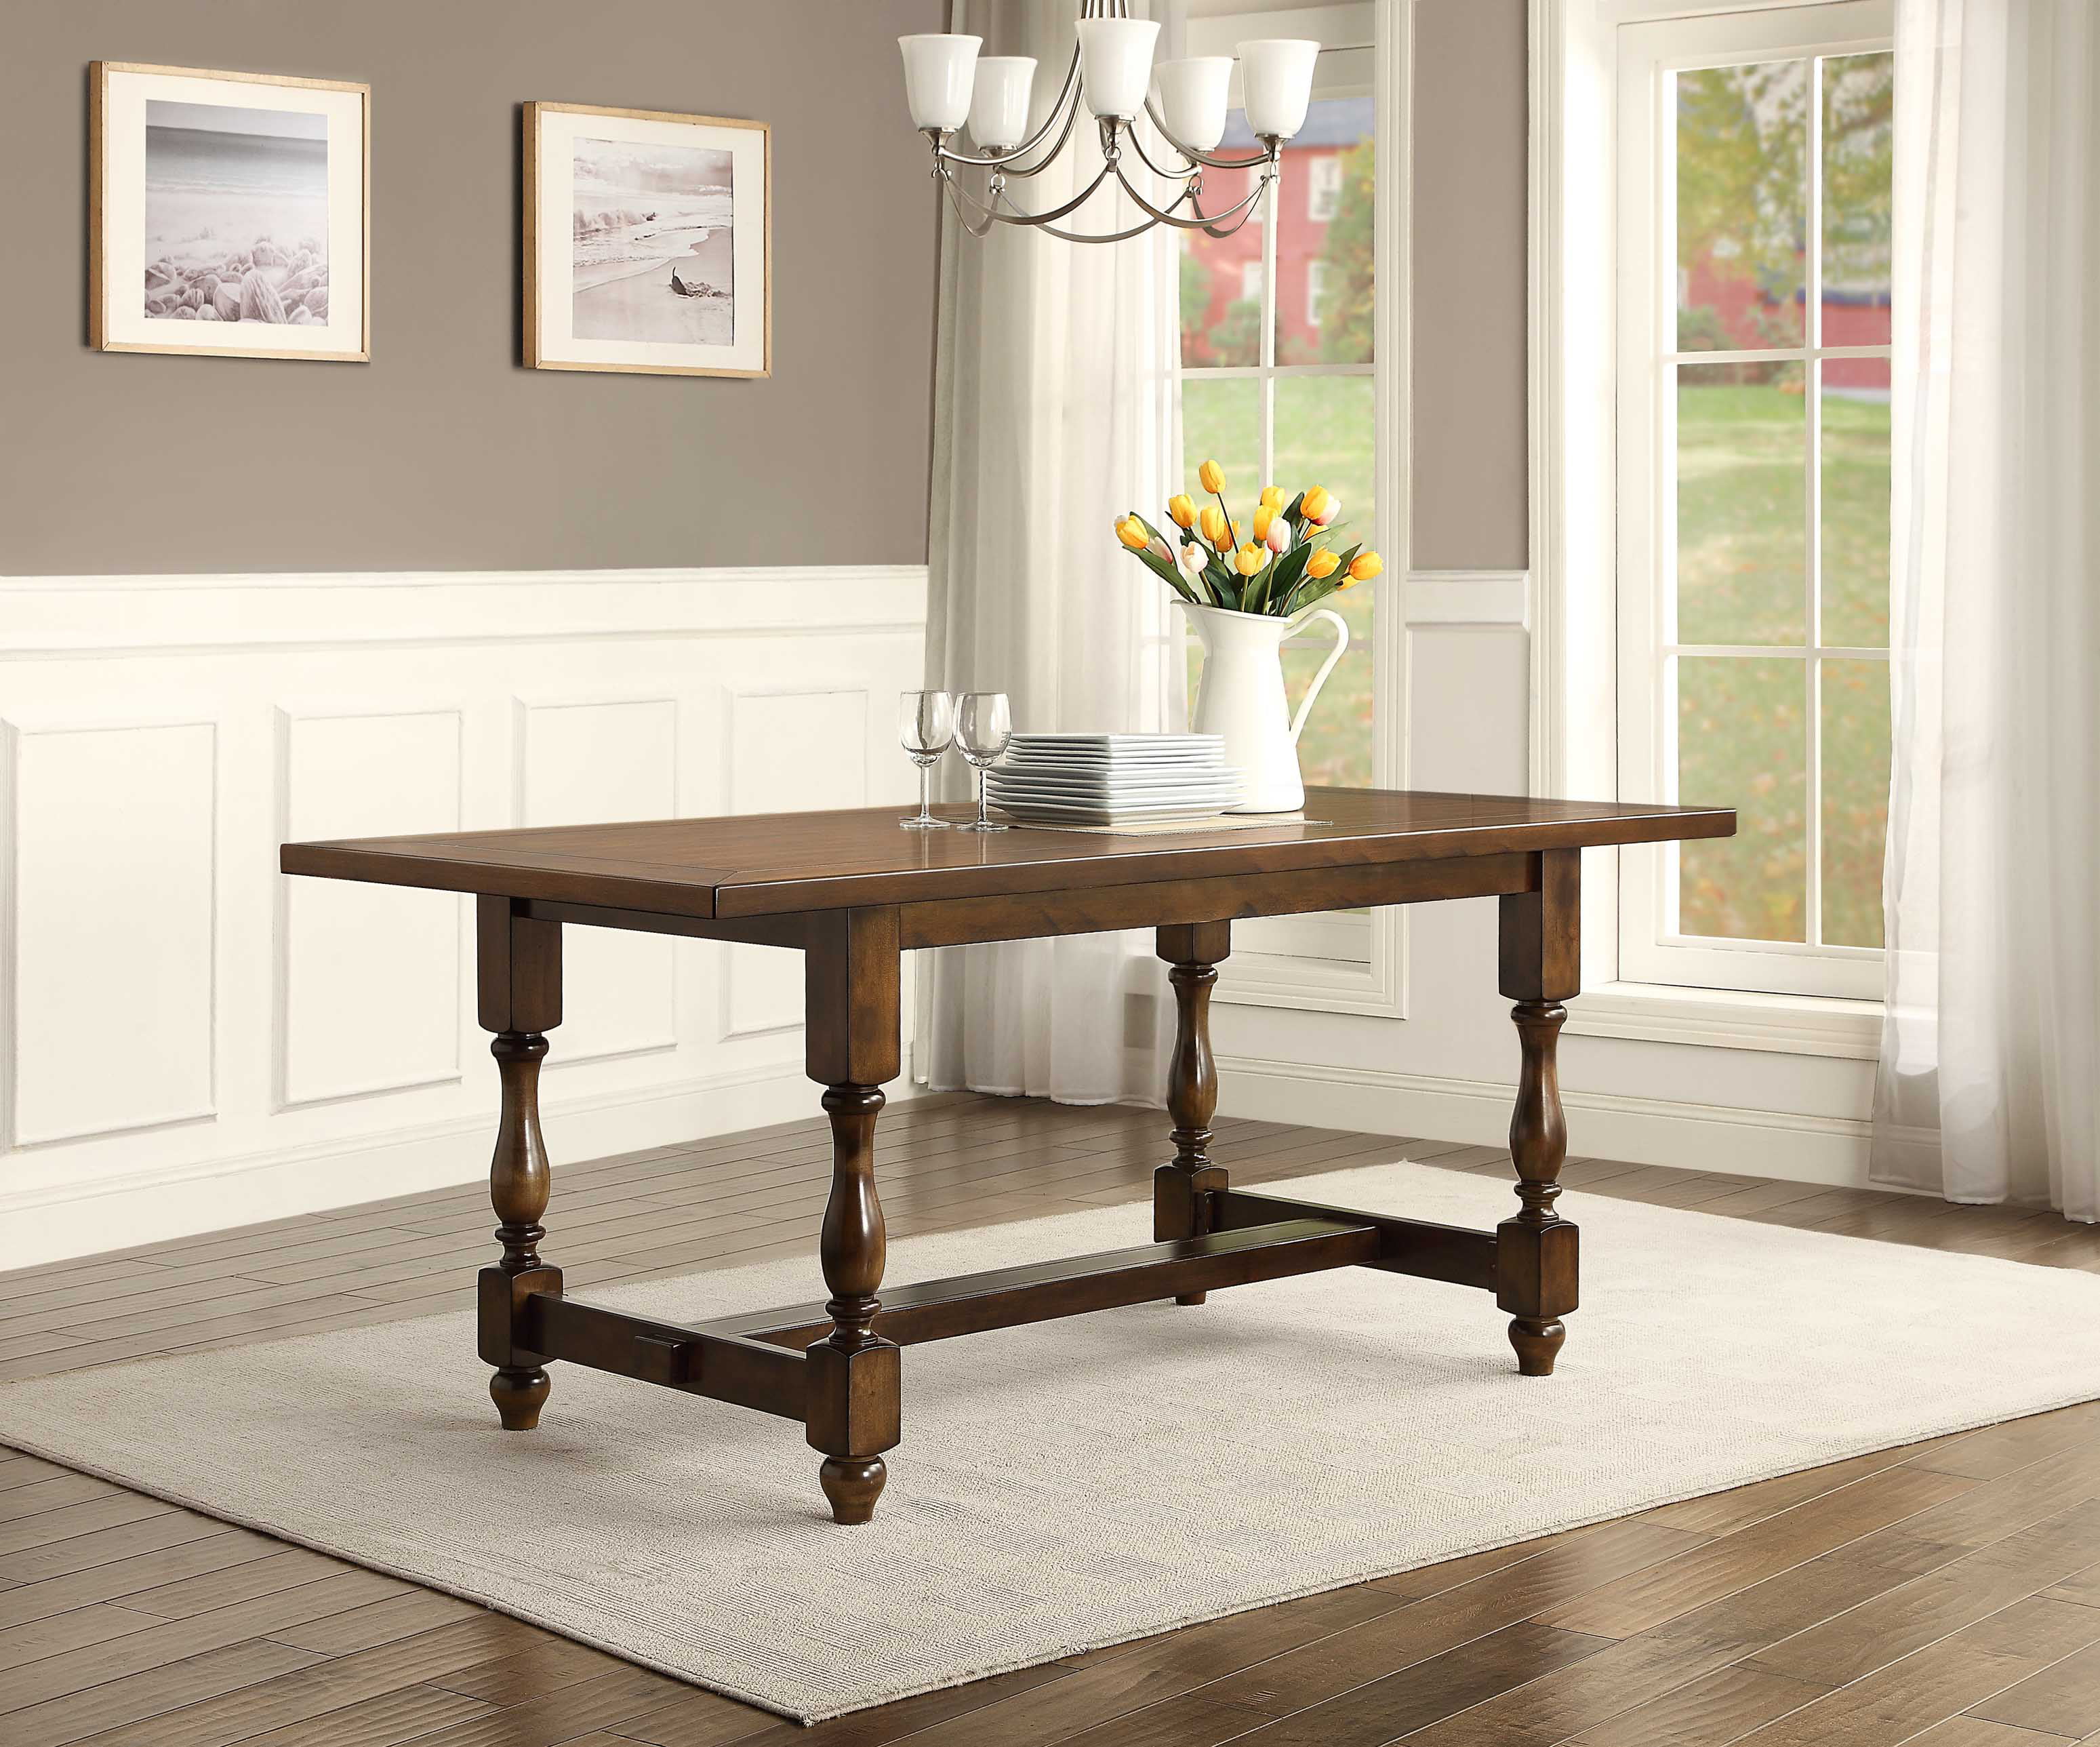 Better Homes and Gardens Autumn Lane Farmhouse Dining Table, Black and